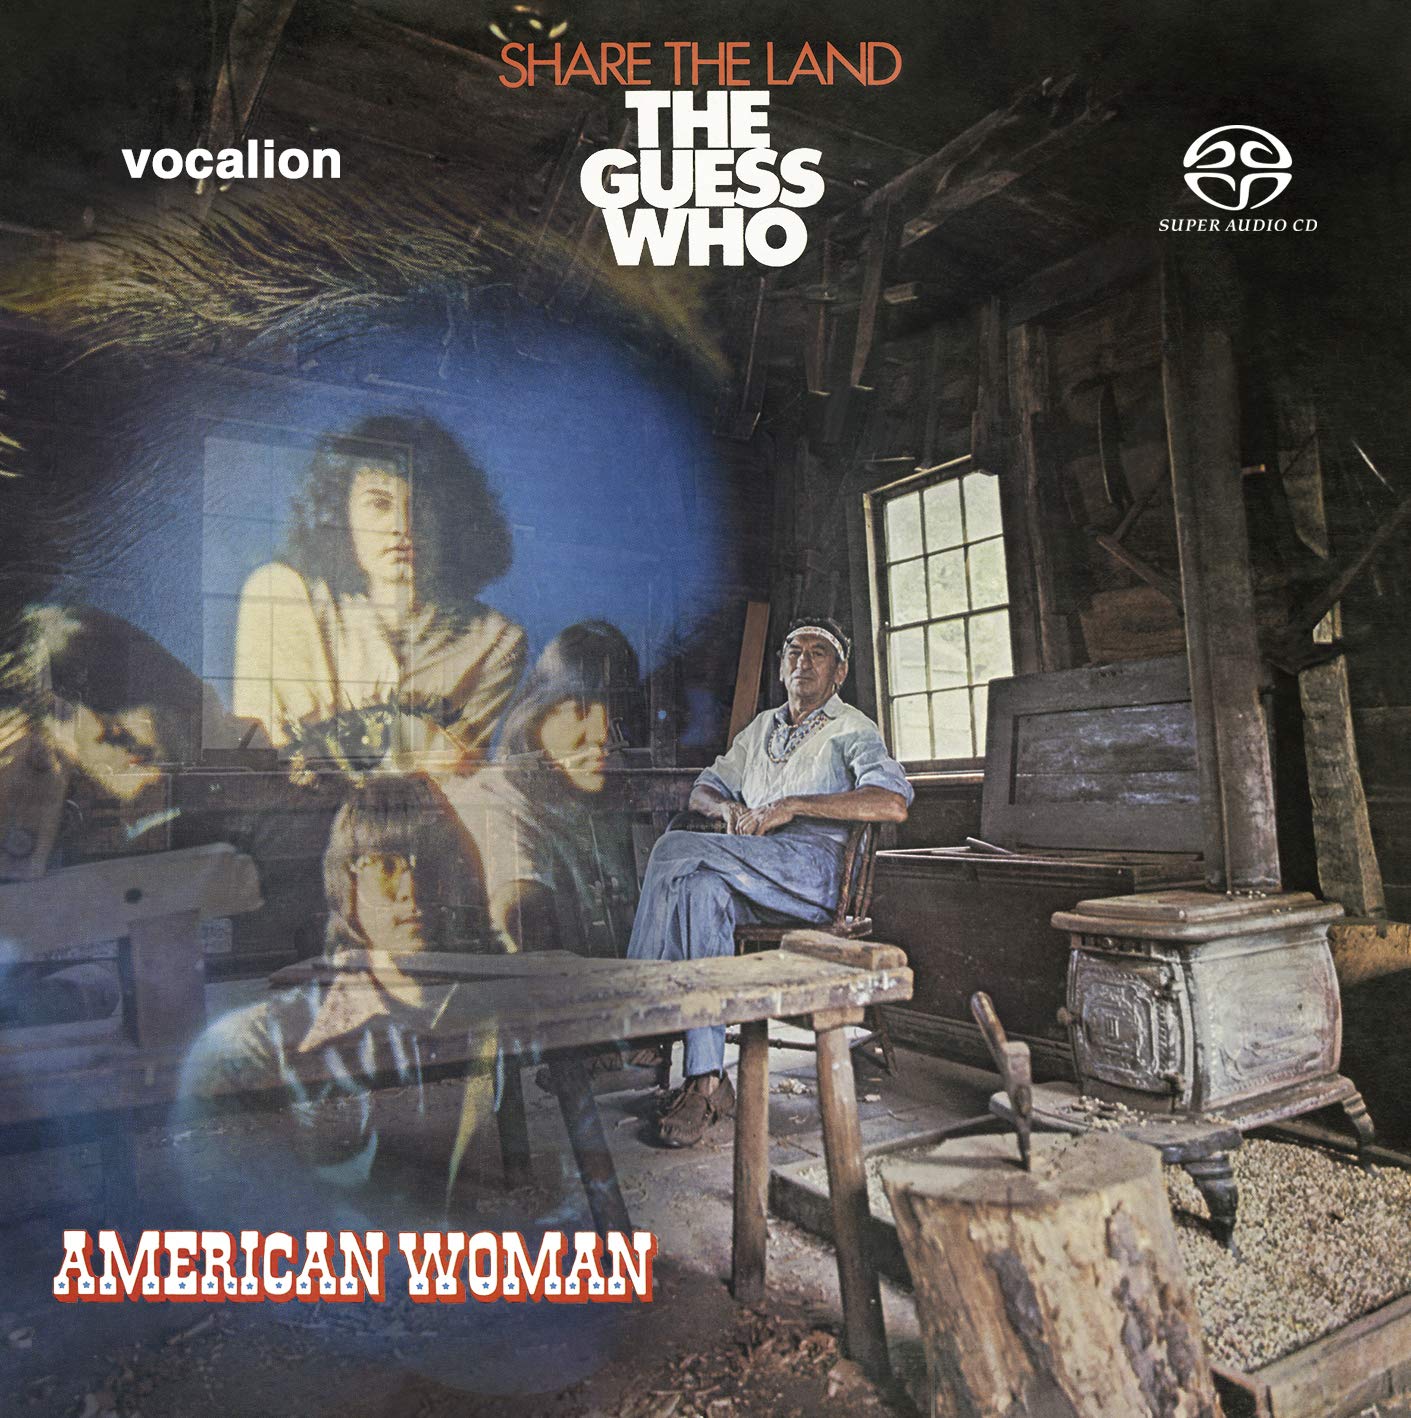 The Guess Who – American Woman & Share The Land (1970) [Reissue 2019] MCH SACD ISO + FLAC 24bit/96kHz